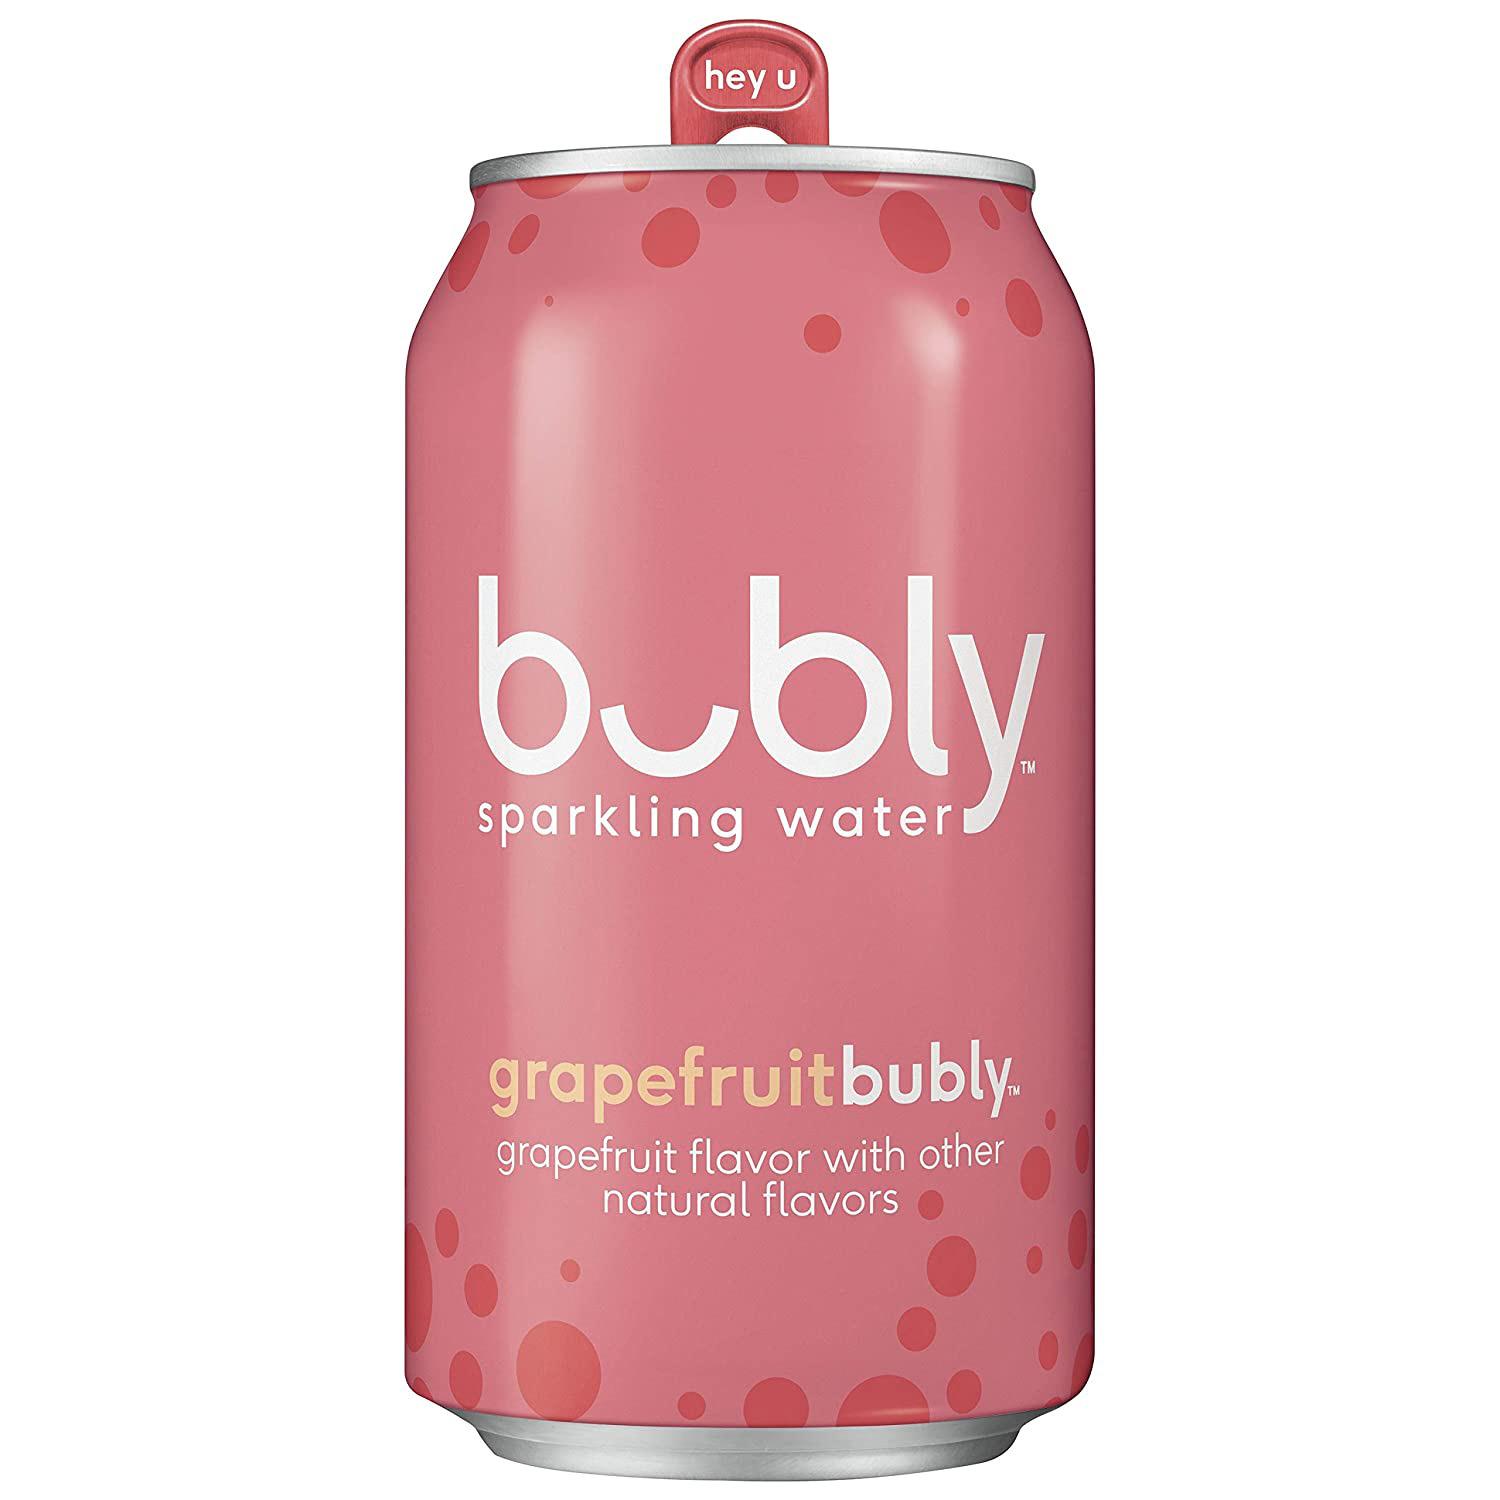 18 Bubly Grapefruit Sparkling Water for $5.20 Shipped